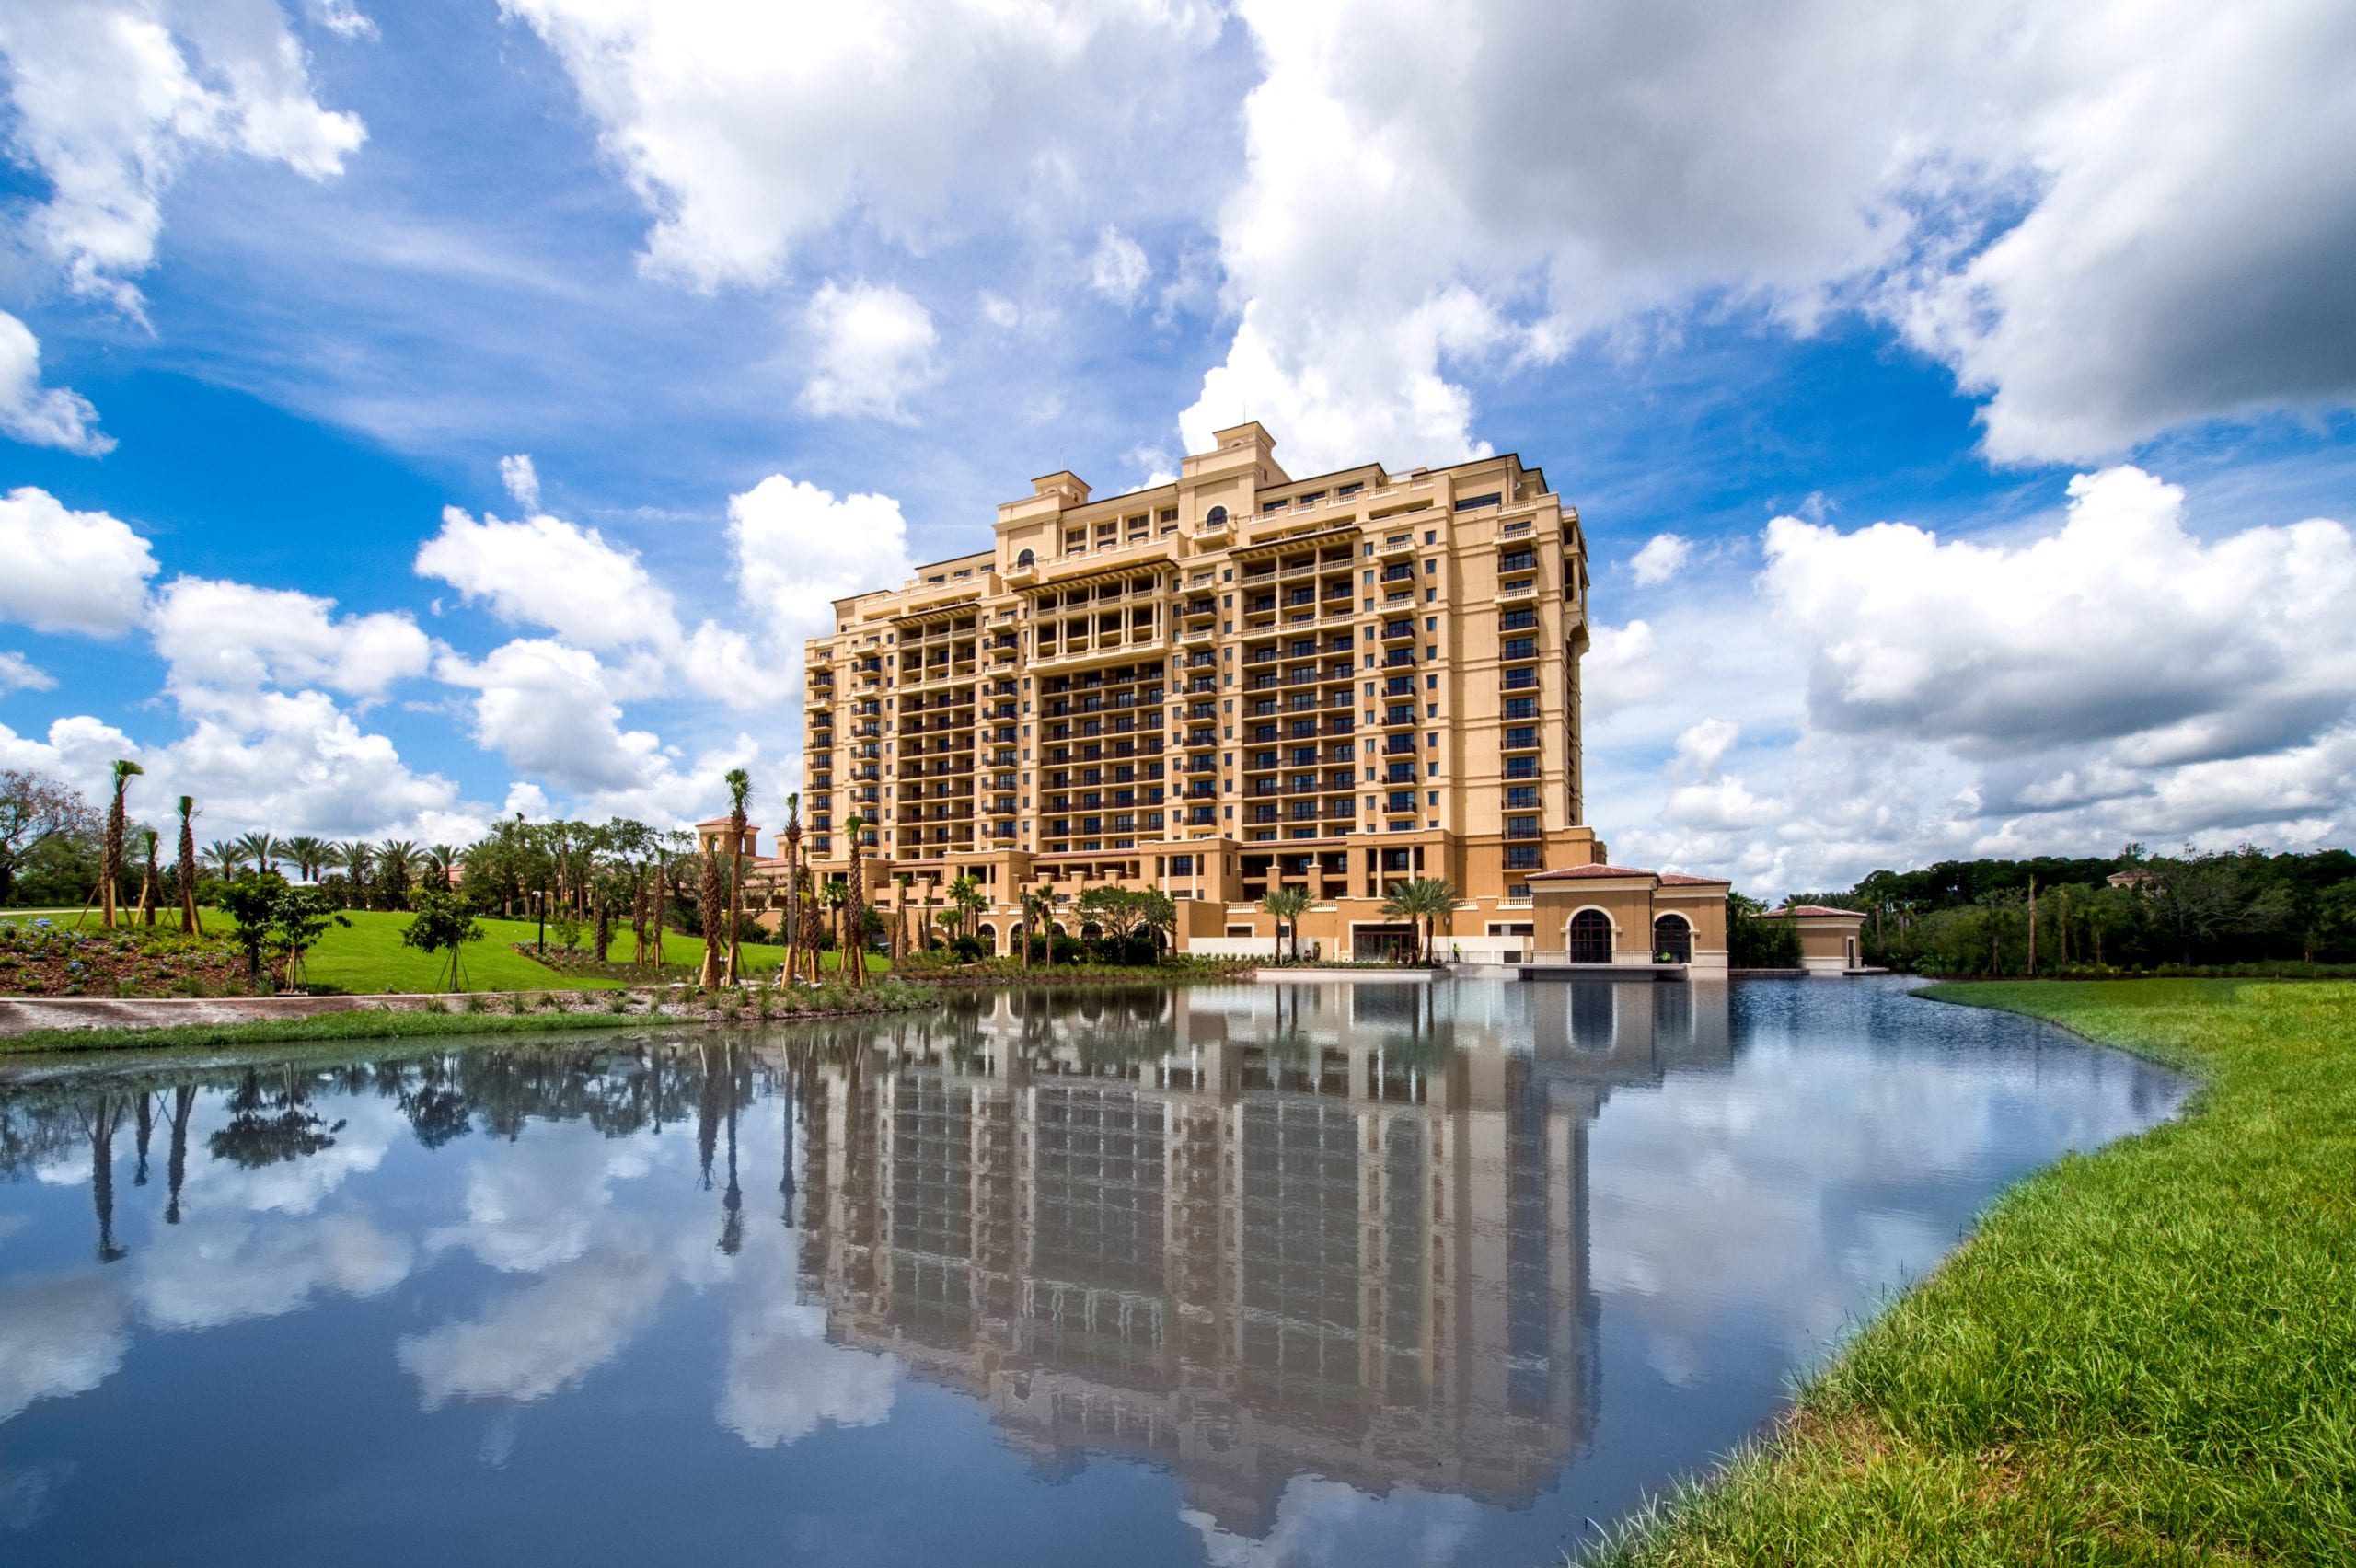 Four Seasons Building by pond under blue cloudy skies with palm trees